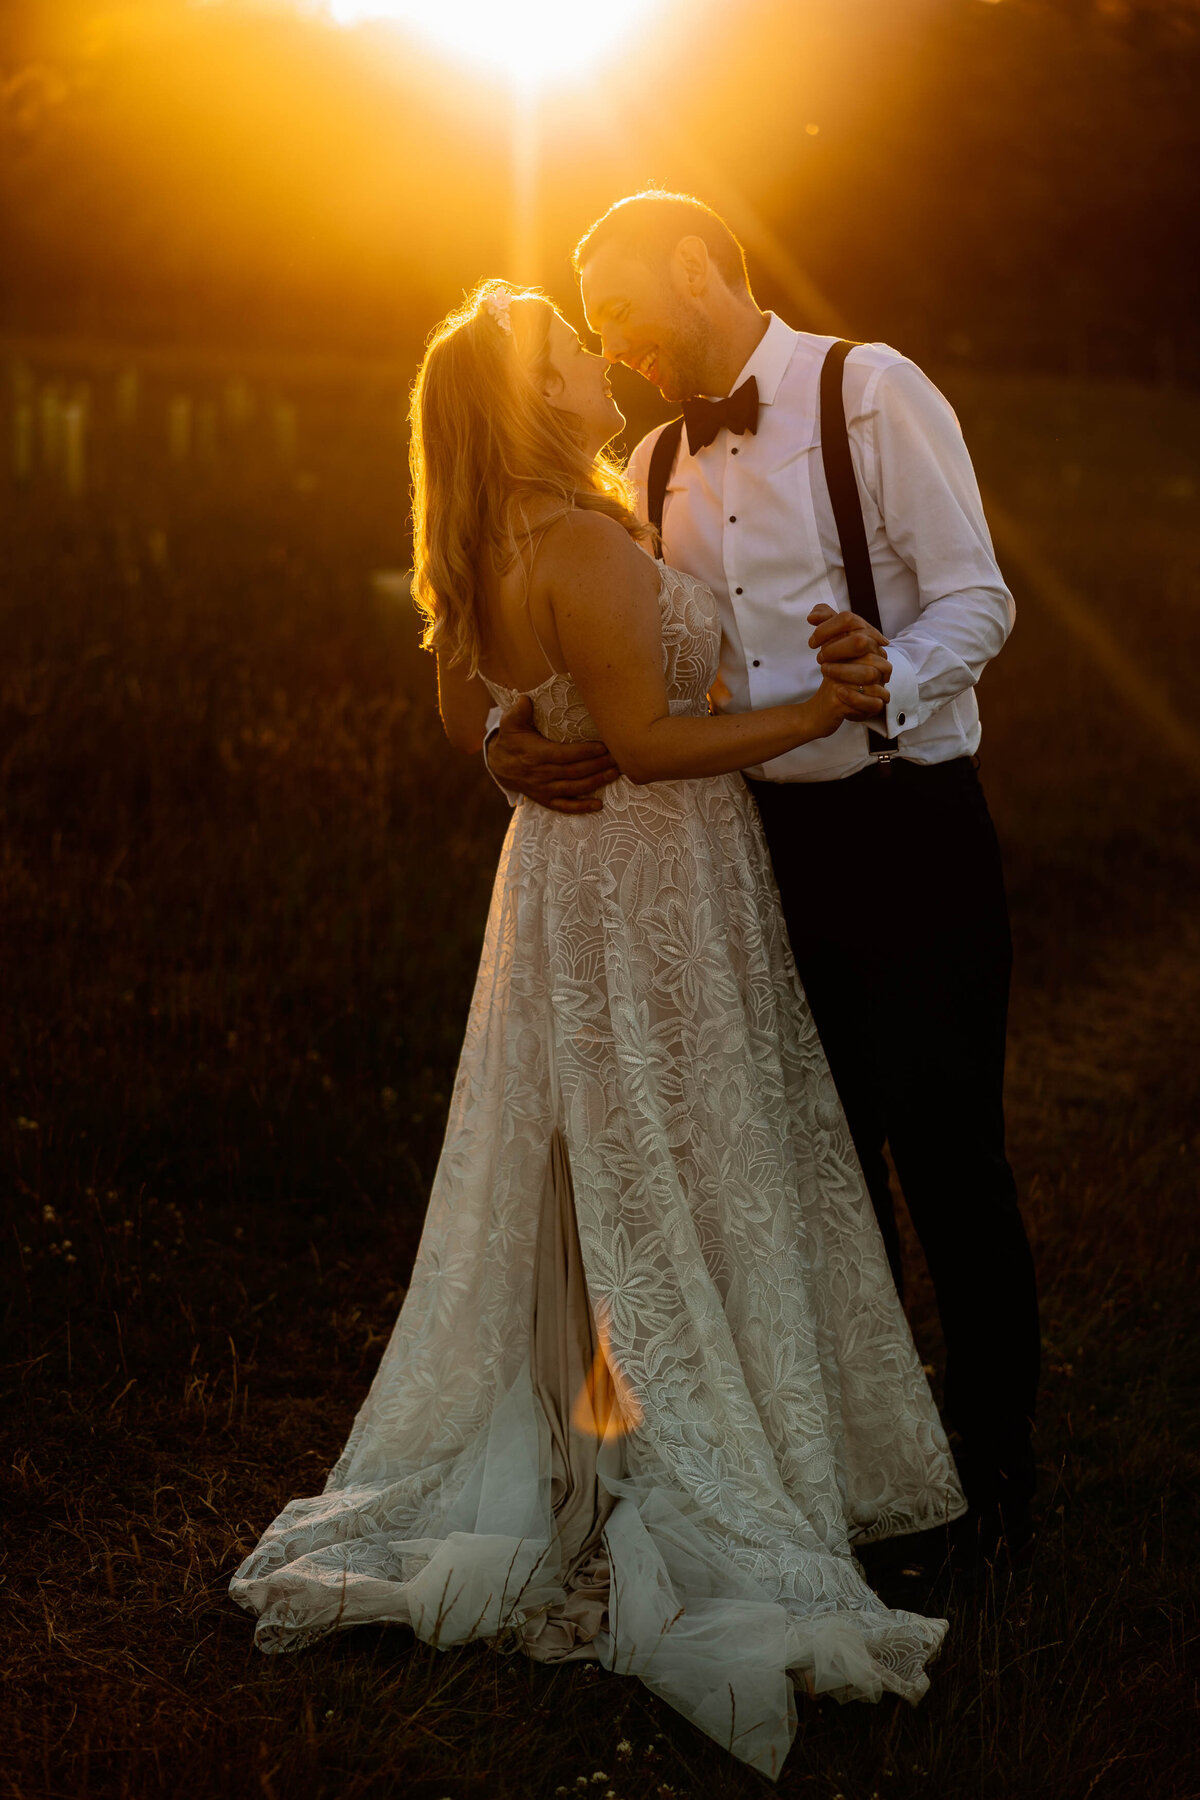 Bride and groom dance together in the golden sunlight at Broughton Sanctuary